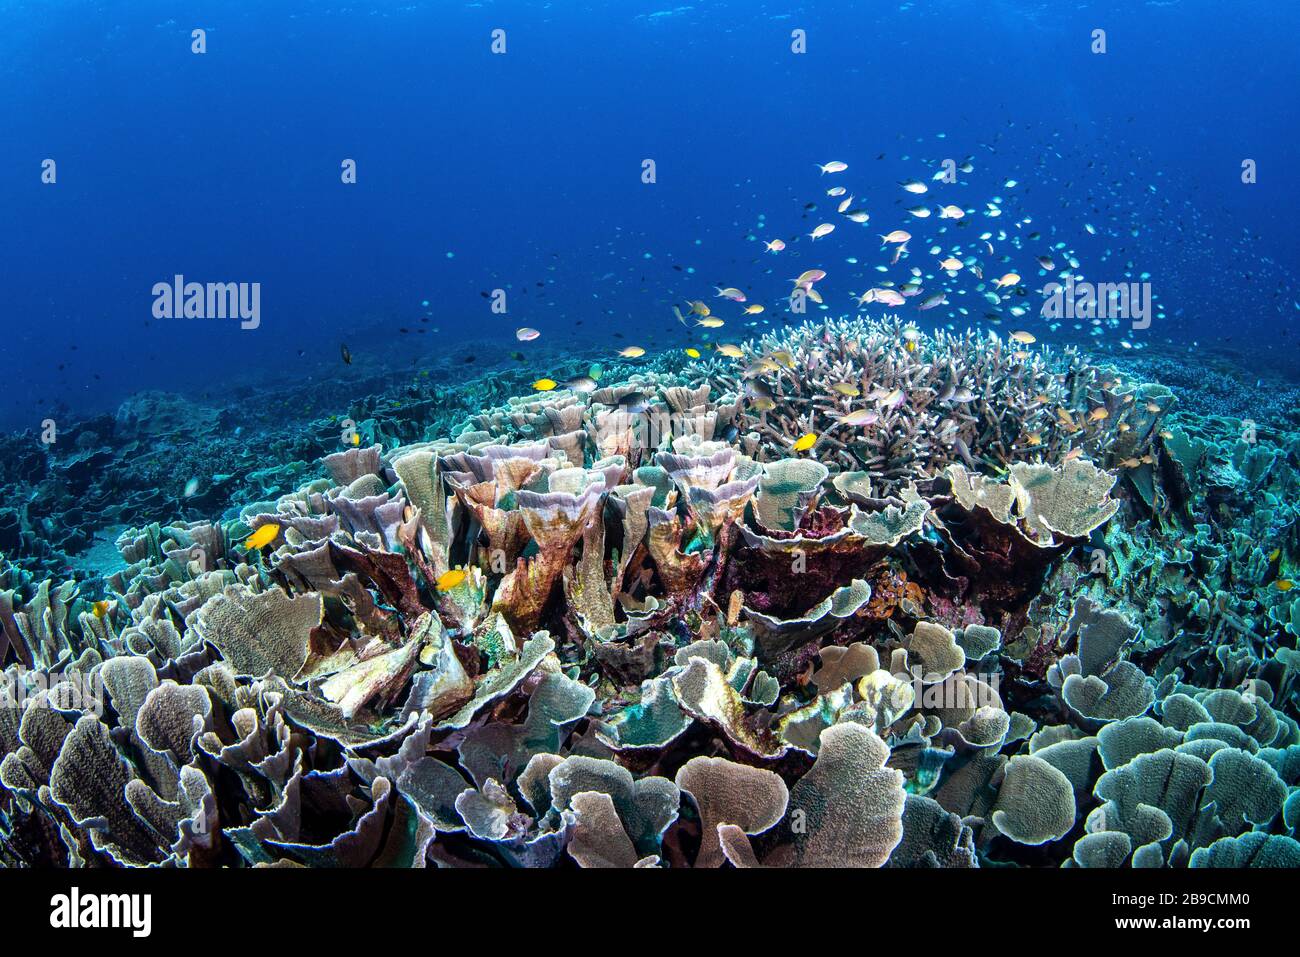 Fish school over a cabbage leaf coral garden, Raja Ampat, Indonesia. Stock Photo